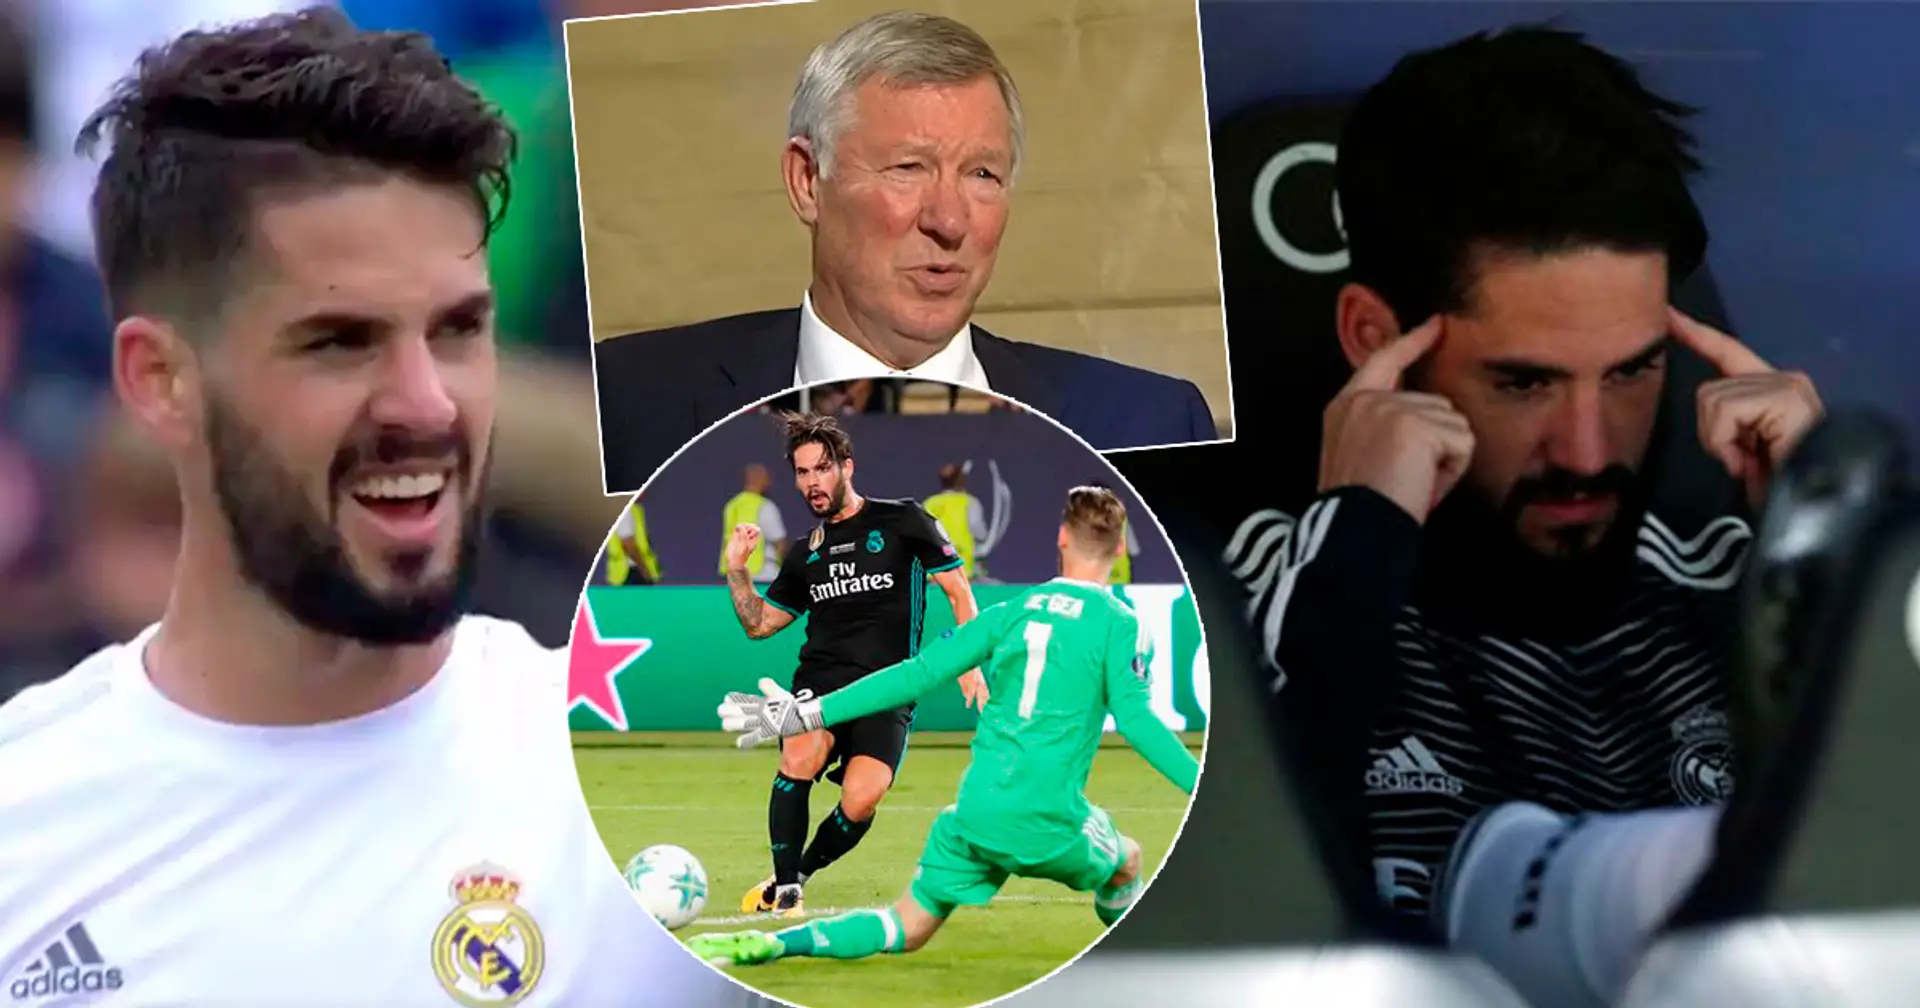 Man United went close to signing Isco in 2013 but opted not to for one very strange reason